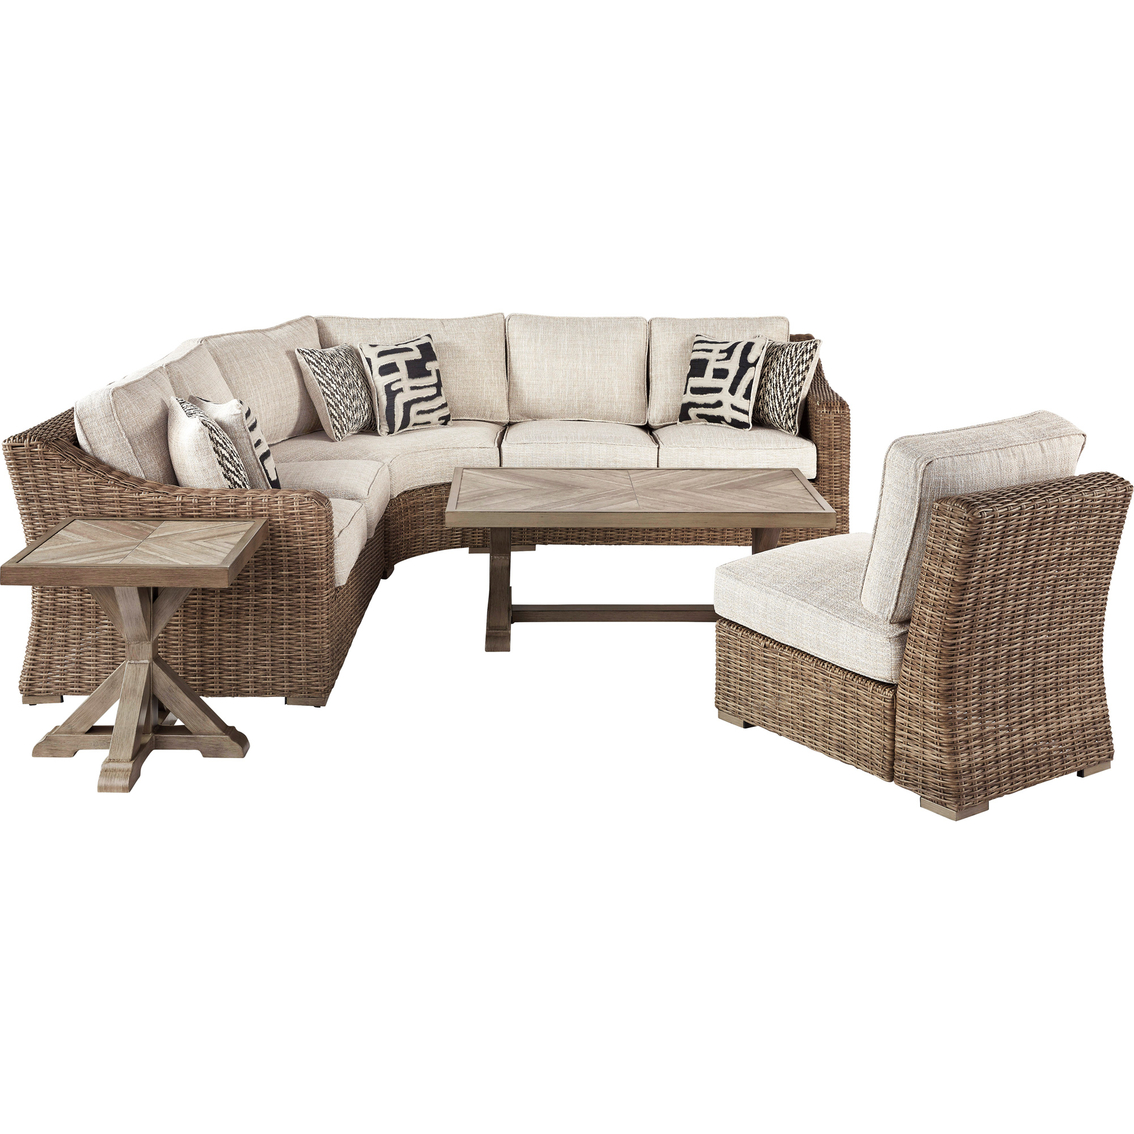 Signature Design by Ashley Beachcroft 4 pc. Sectional with Coffee and End Table - Image 1 of 9